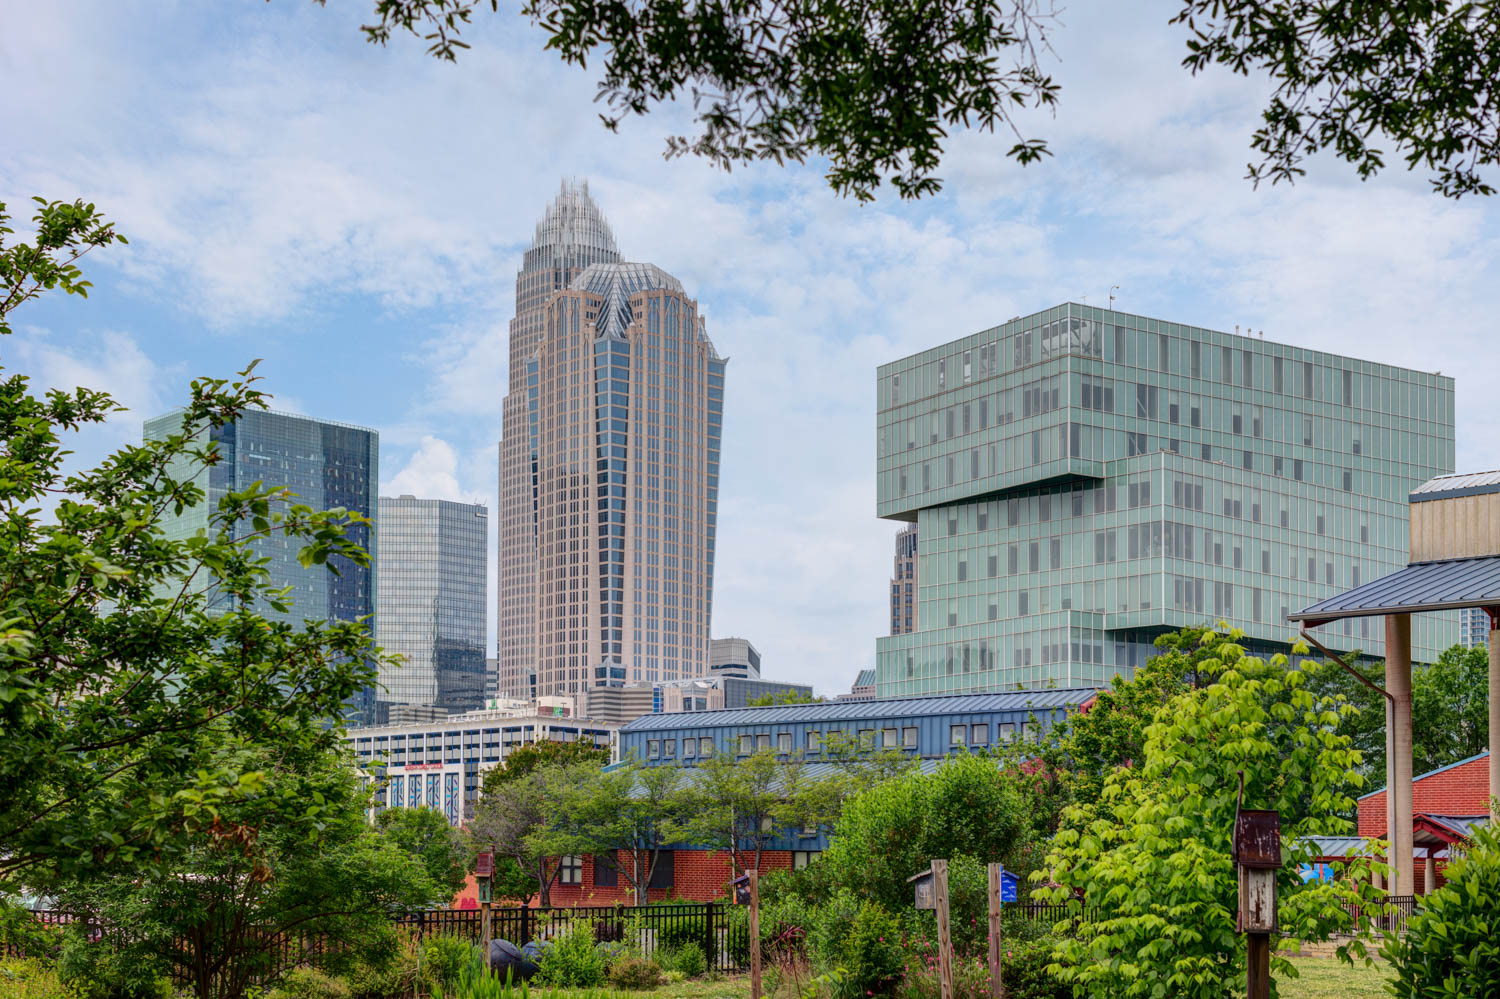 architecture photography of uptown charlotte buildings.jpg